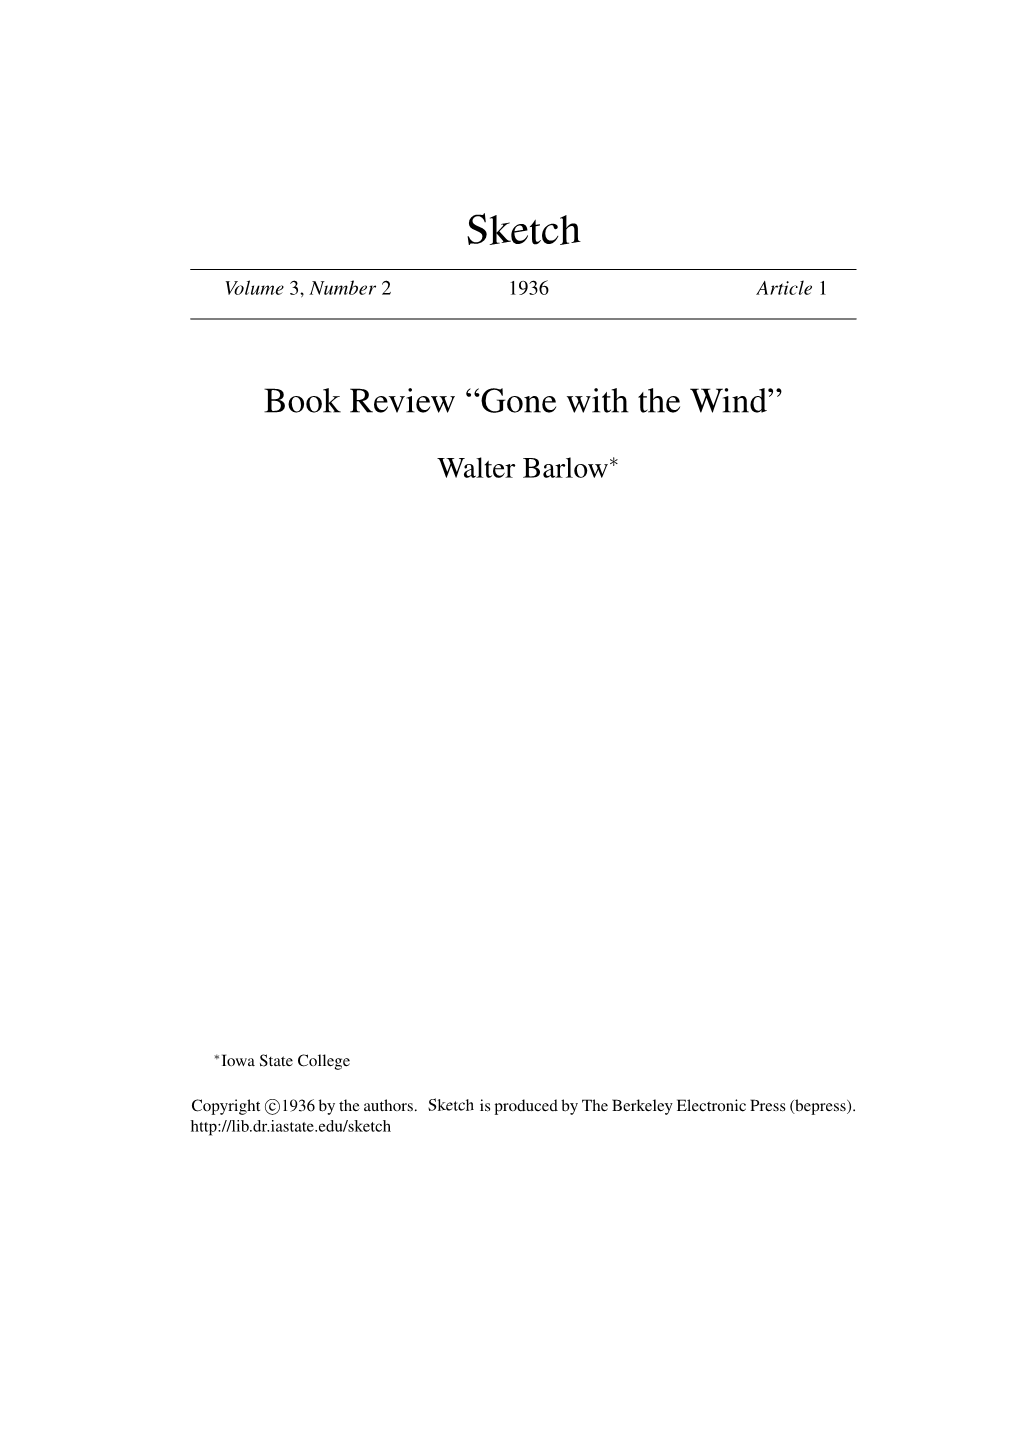 Book Review "Gone with the Wind"